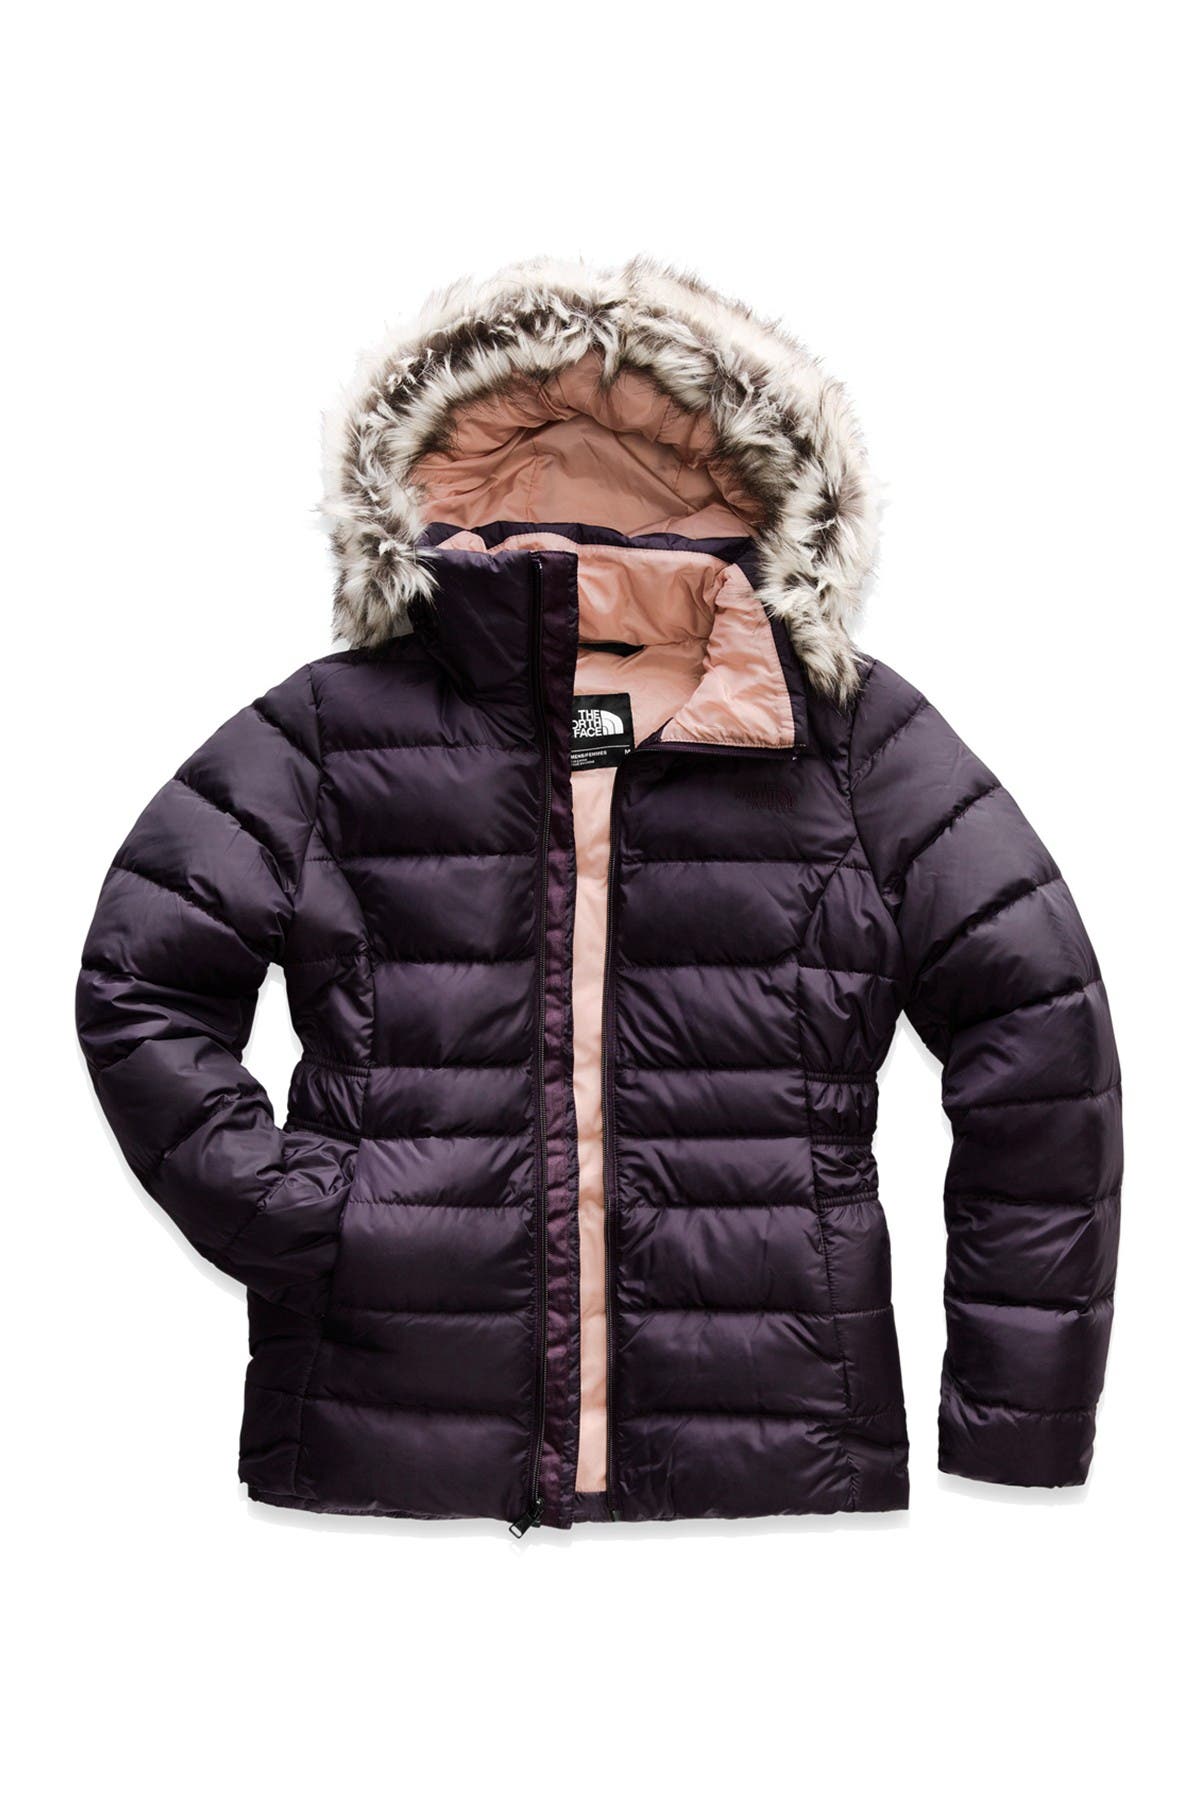 north face coat with fur hood